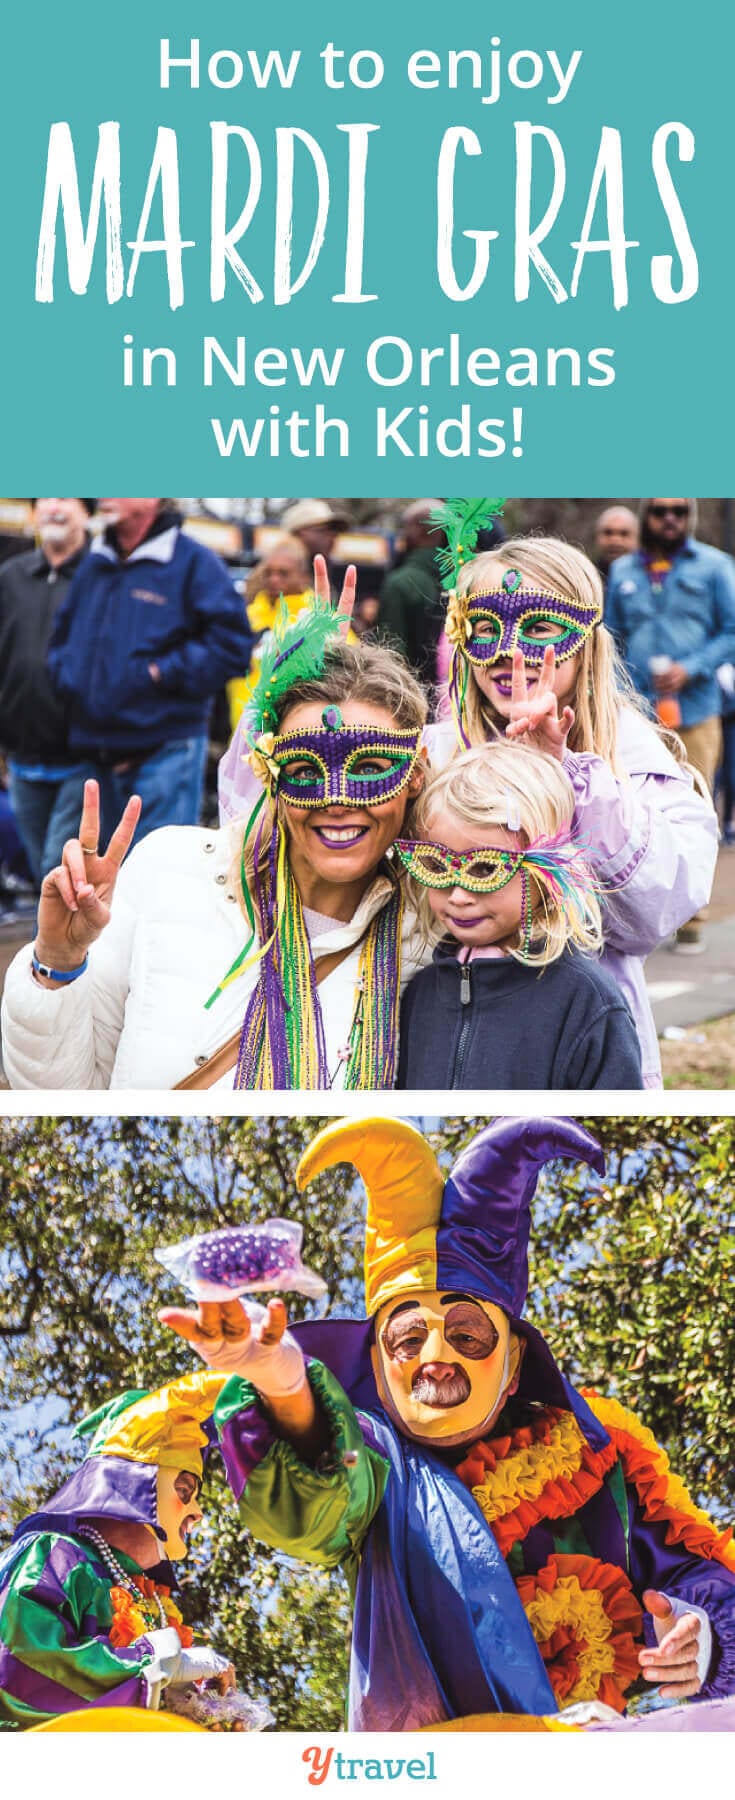 New Orleans Mardi Gras - Are you planning a trip to New Orleans for the Mardi Gras Festival? Wondering if you can do Mardi Gras with kids? This guide offers tips on Mardi Gras costumes, Mardi Gras dates, what Mardi Gras Parades to see, tips for enjoying the festival with kids, and much more!